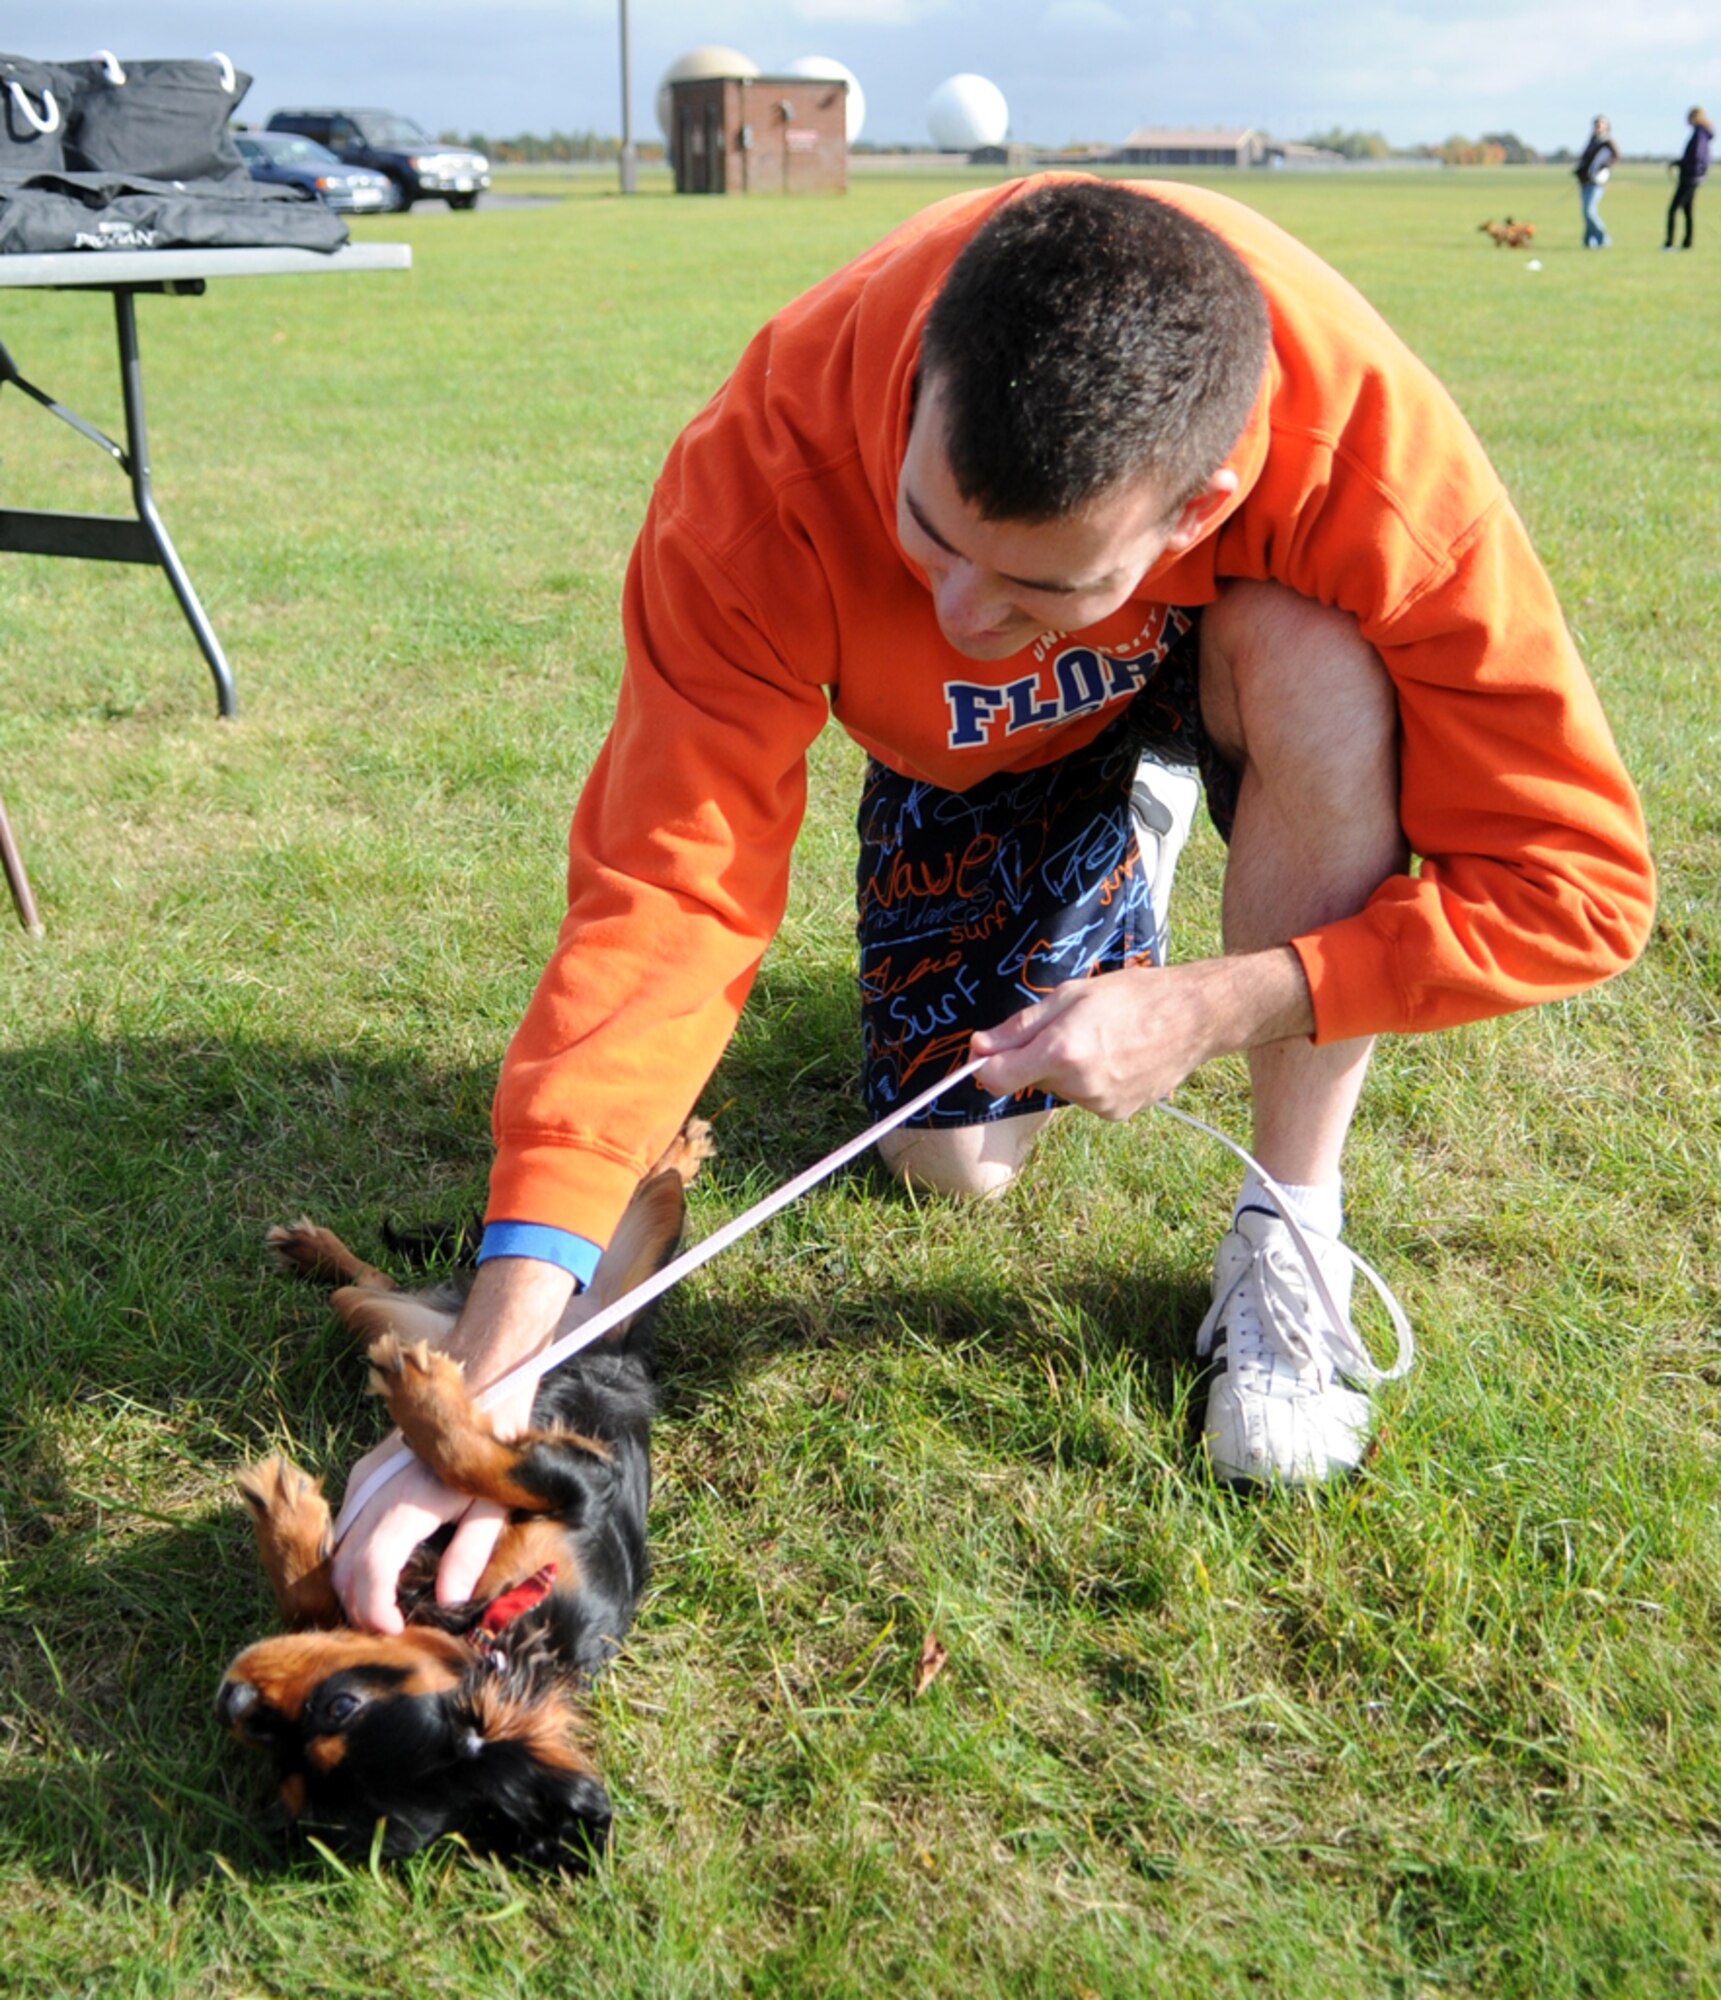 RAF FELTWELL, England -- Senior Airman Daniel Guck, 48th Aircraft Maintenance Squadron, RAF Lakenheath, pets his dog Duchess at the RAF Feltwell Vet Clinic's 2nd Annual Petfest Oct. 12.  More than 100 pet owners showed up with their furry friends - many in costume - for the event, which helped raise money for a local cat charity.  (U.S. Air Force photo/Staff Sgt. Austin M. May)